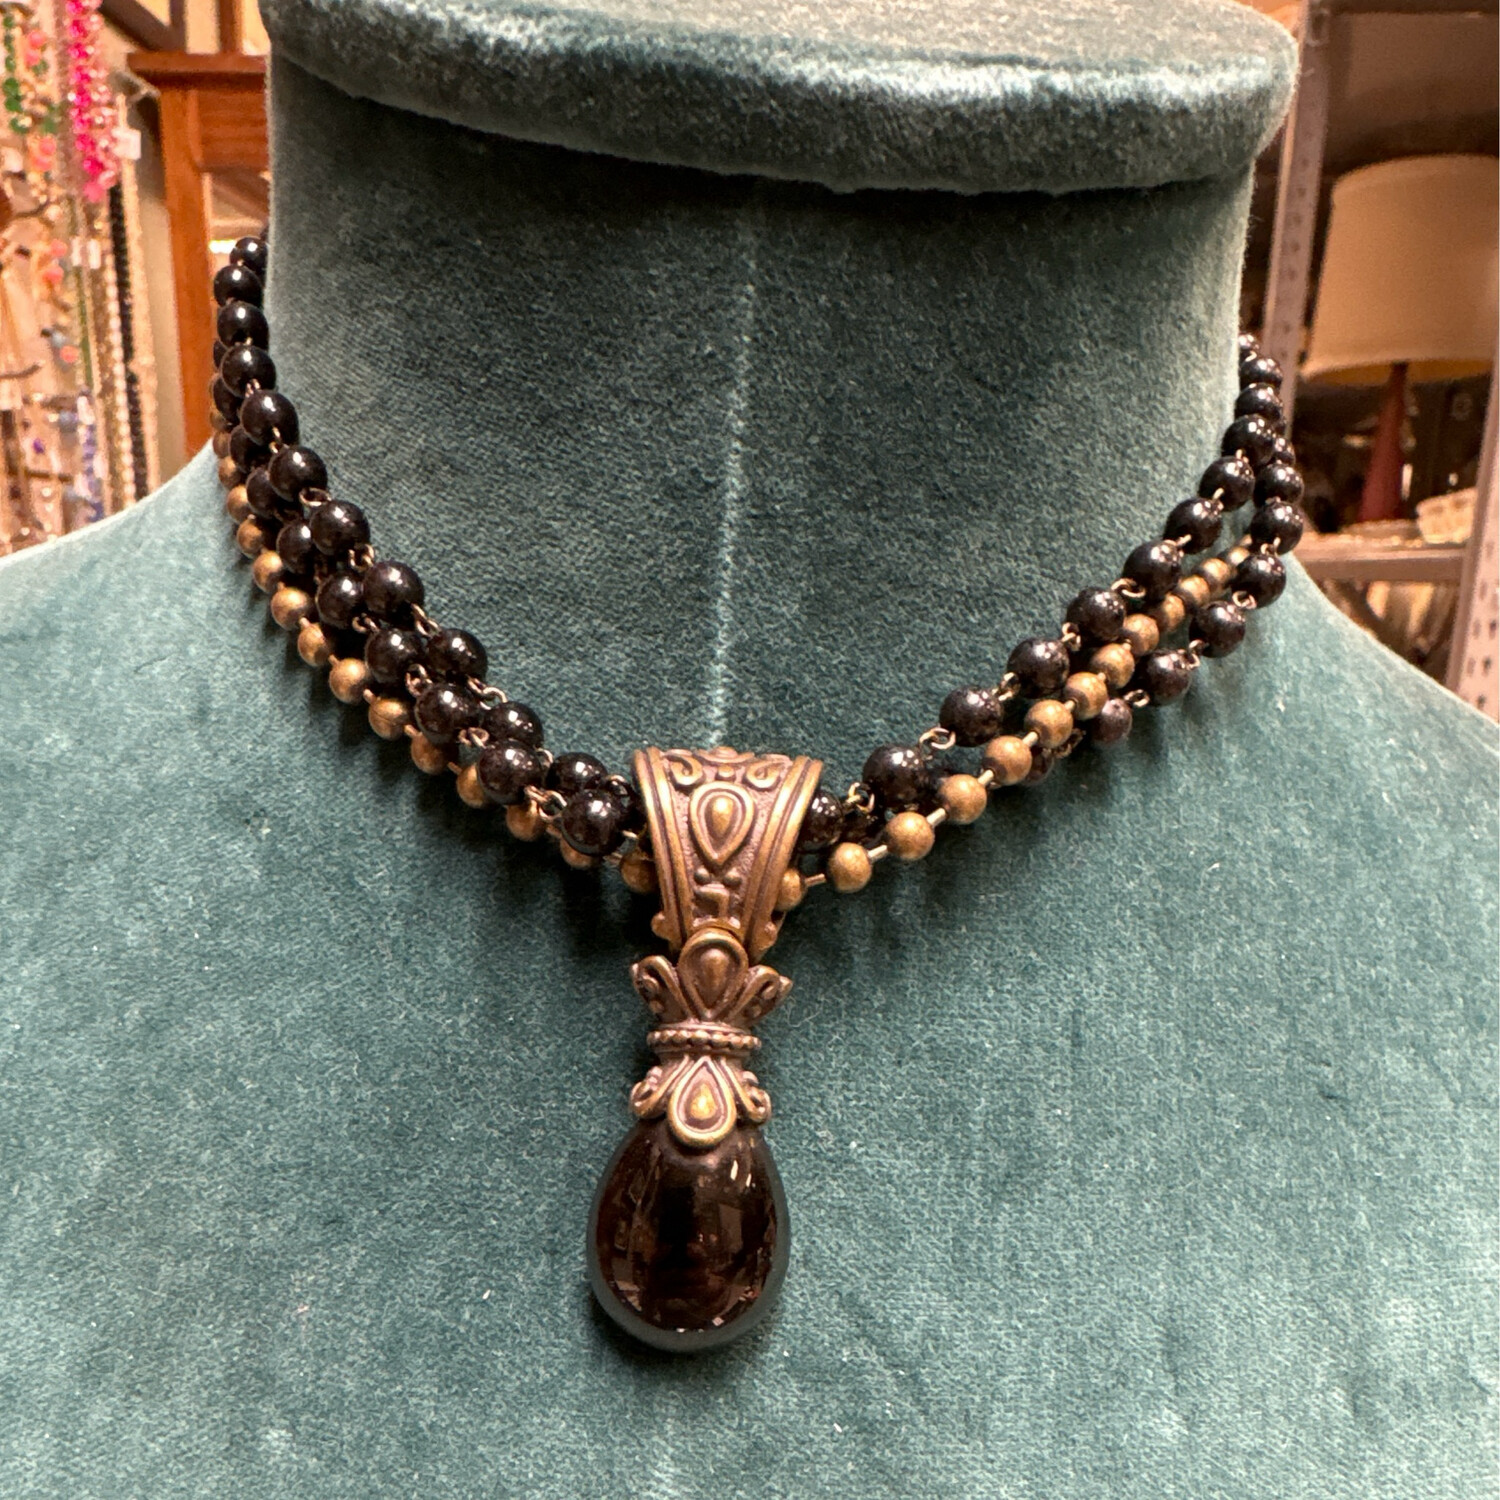 Vintage Black and Gold Necklace - MH